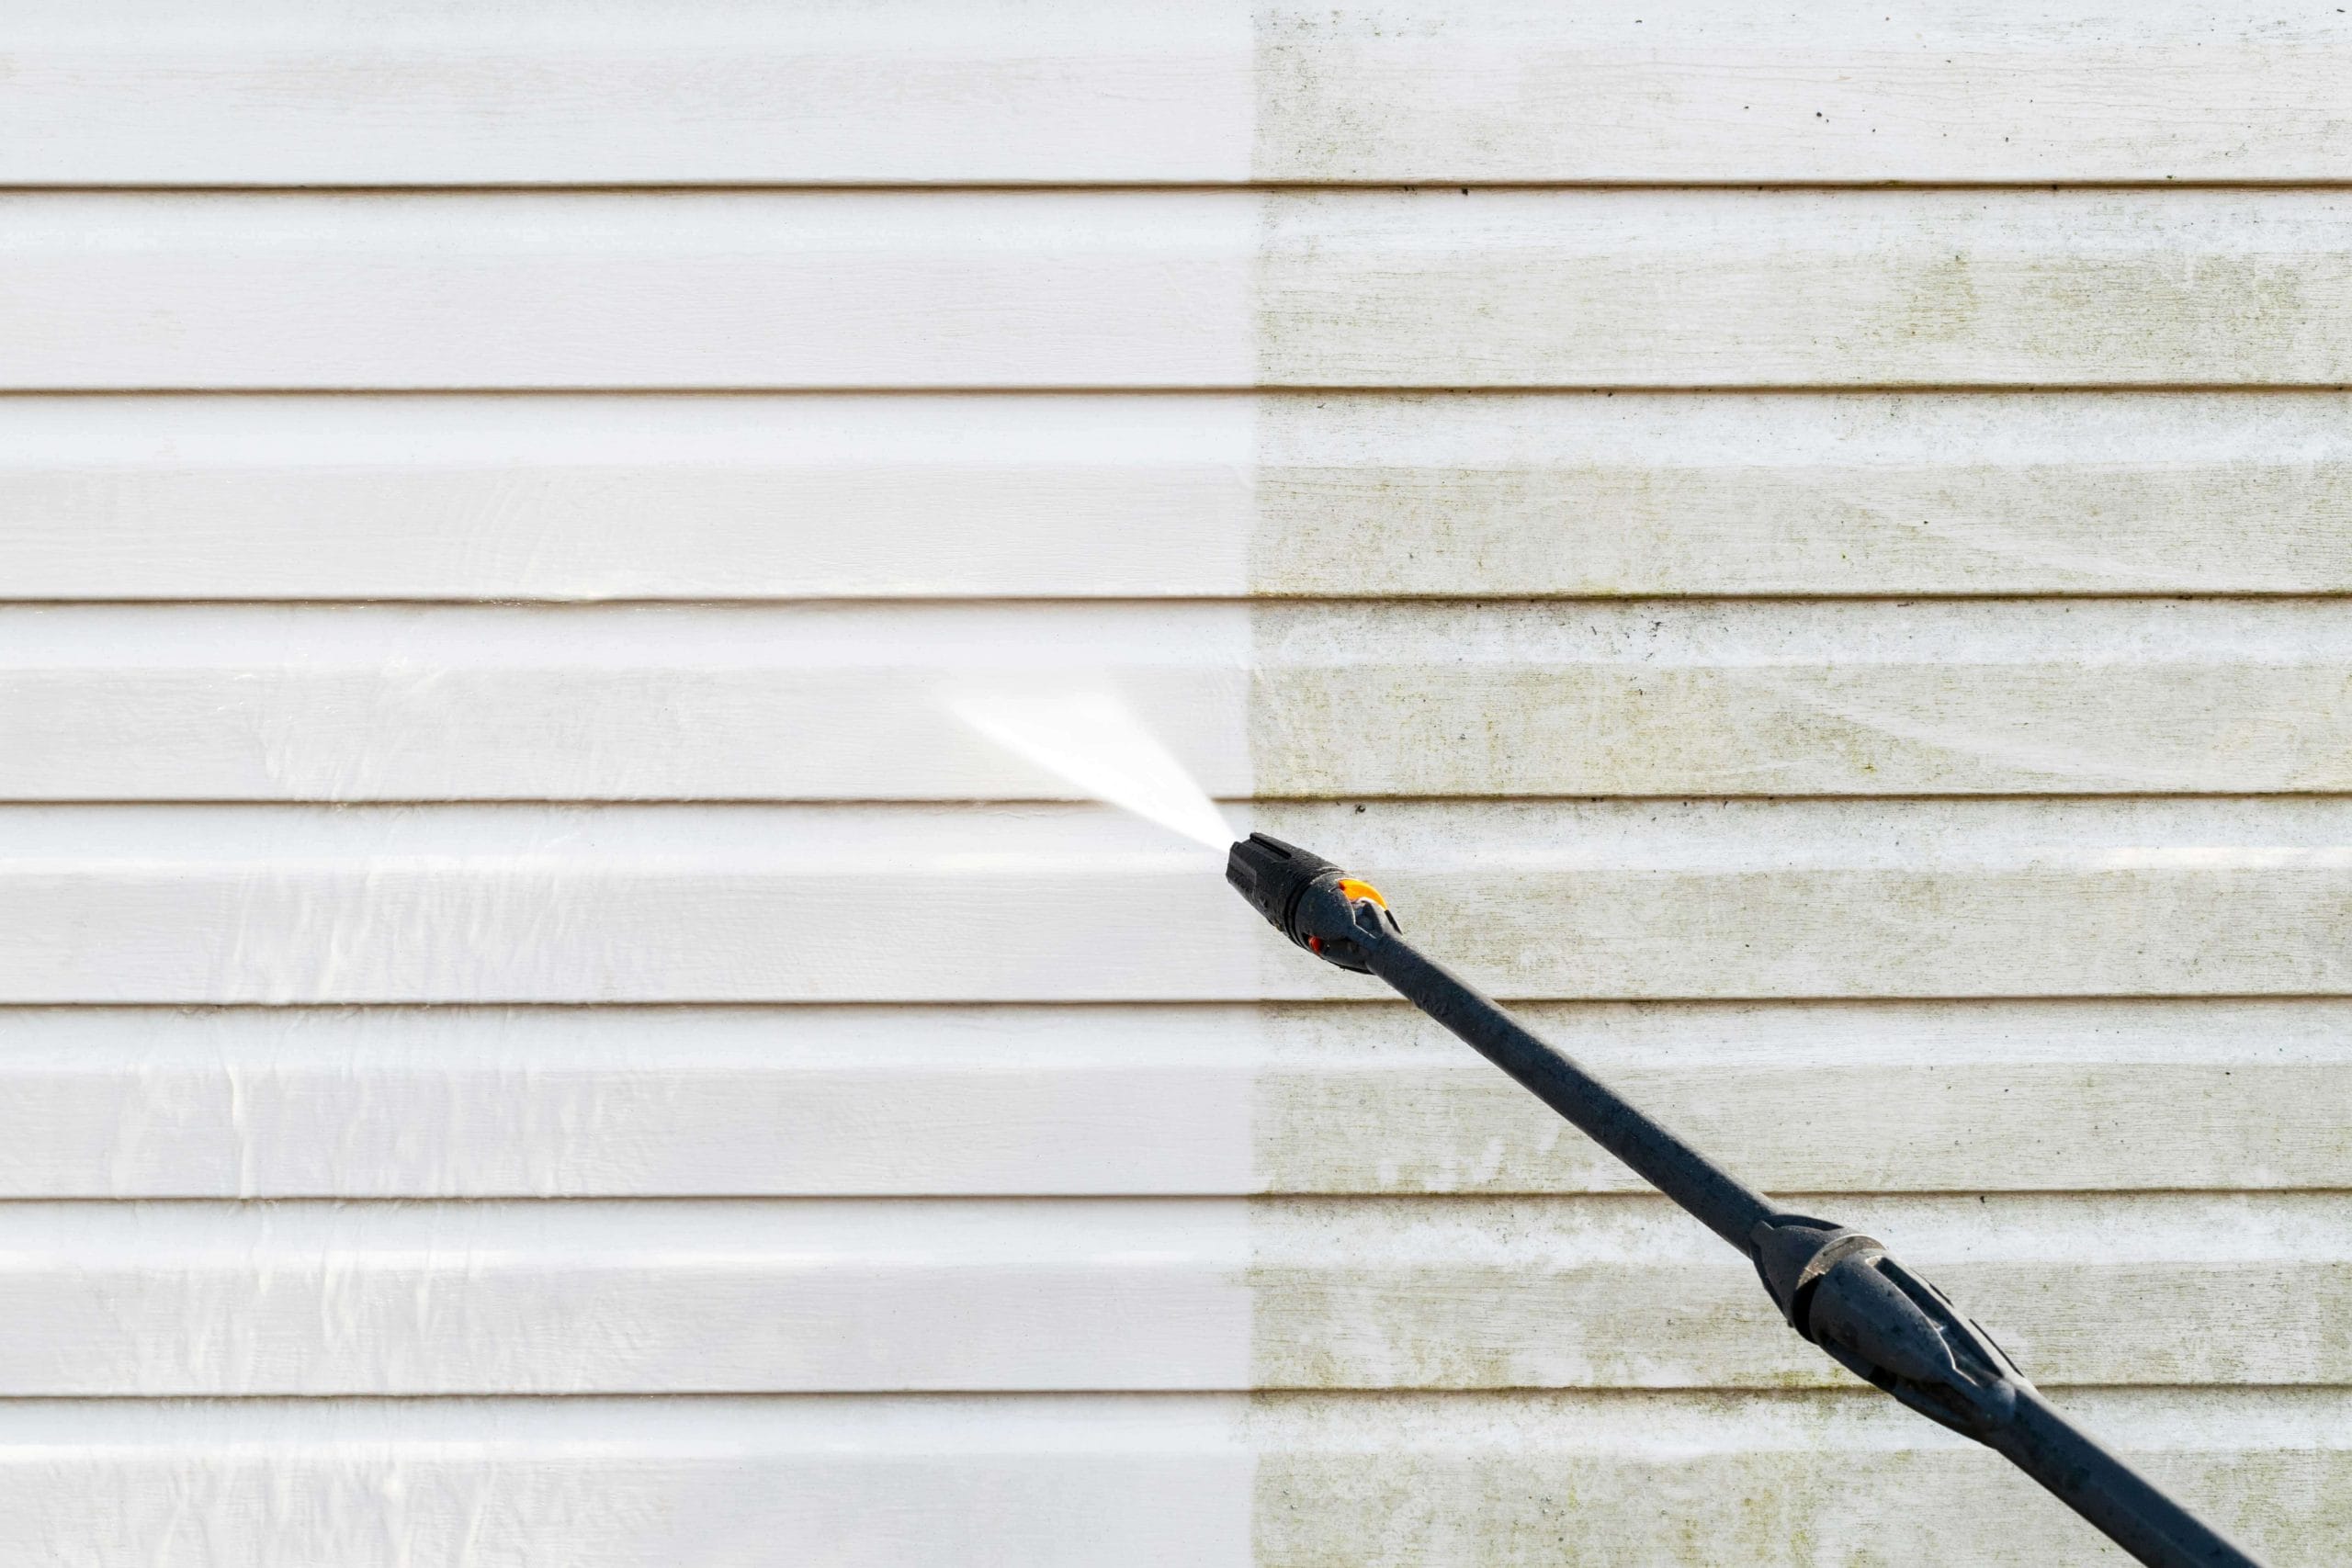 Residential exterior power washing in Orange County, CA: Before and after transformation.